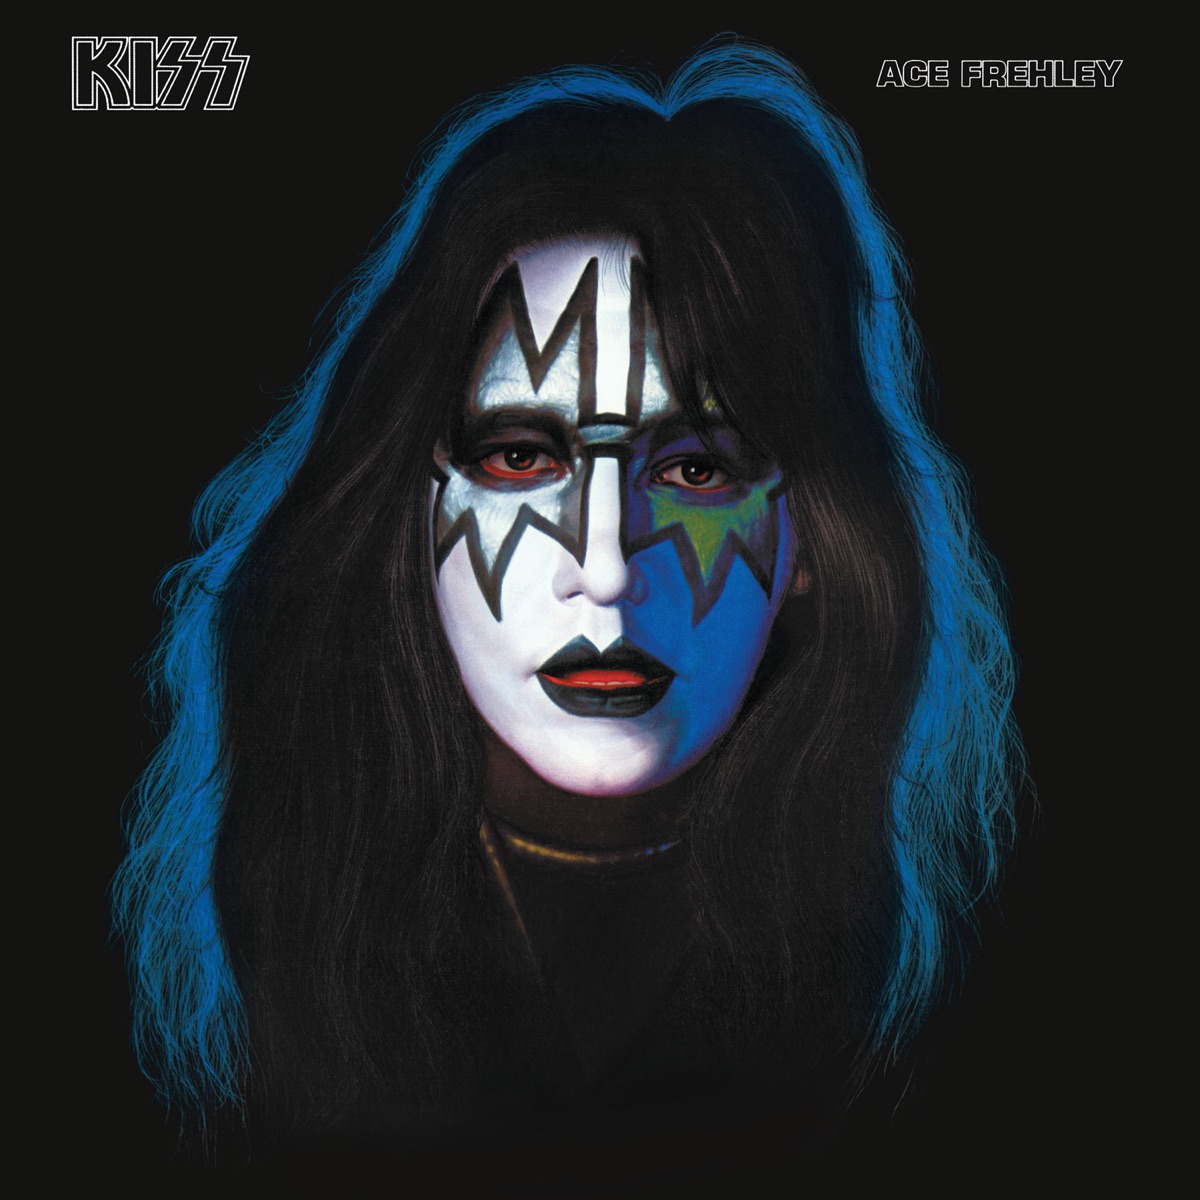 Ace Frehley Ace Frehley cover artwork